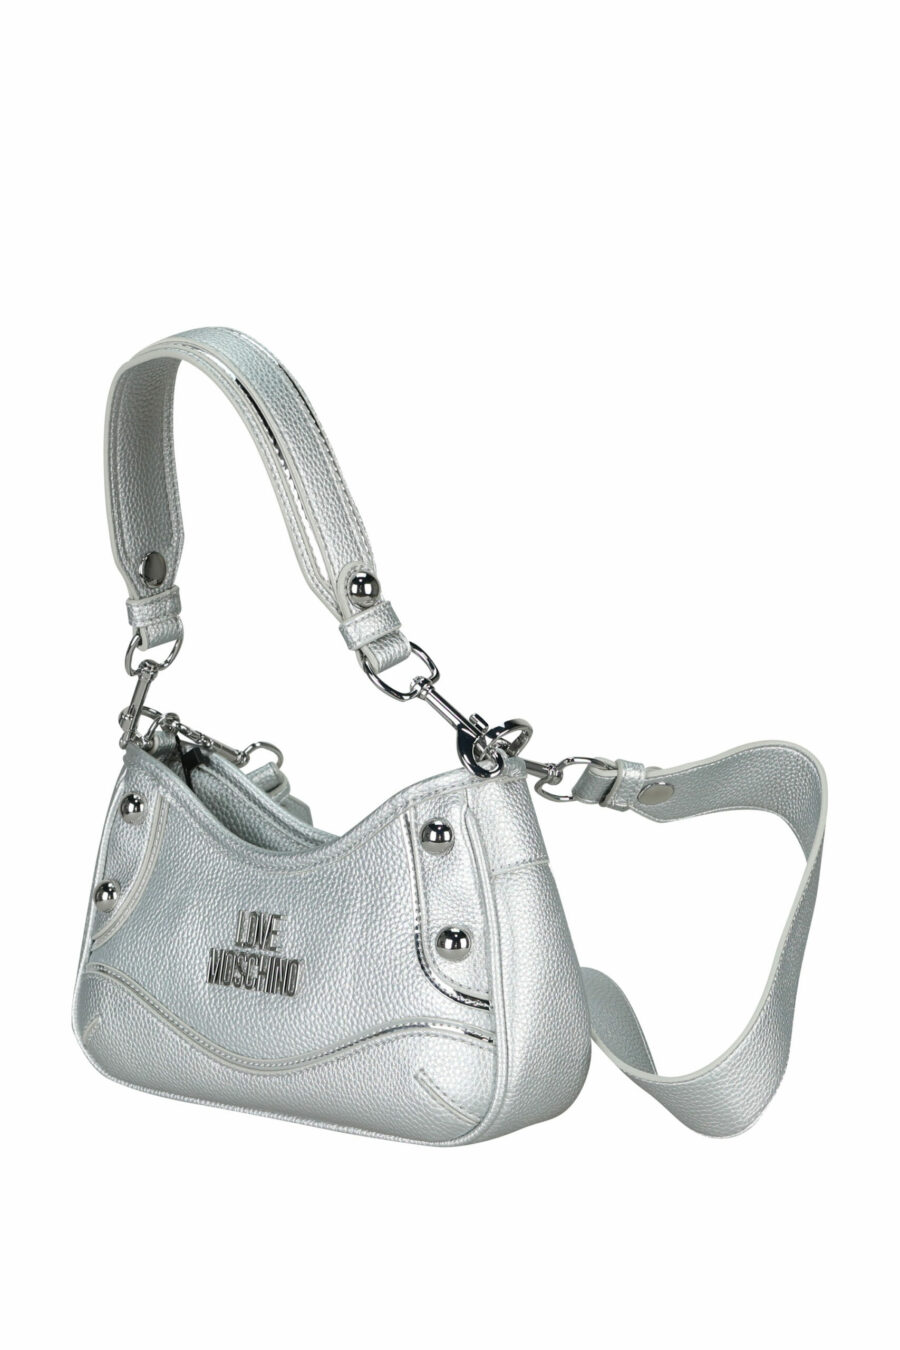 Silver leather shoulder bag with logo and gold details - 8050537397687 1 scaled